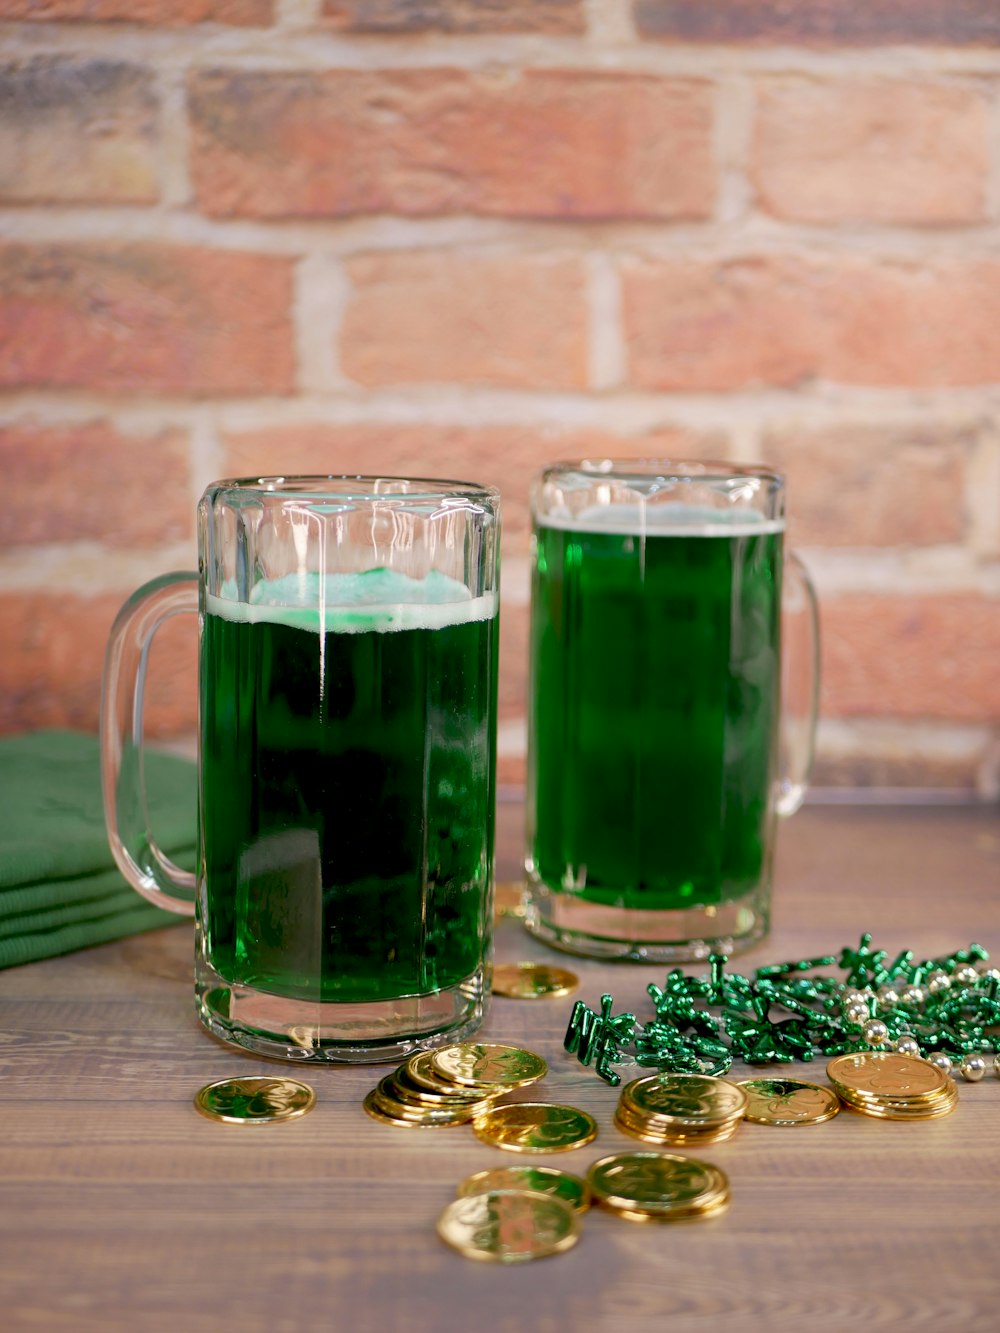 two mugs filled with green liquid next to gold coins